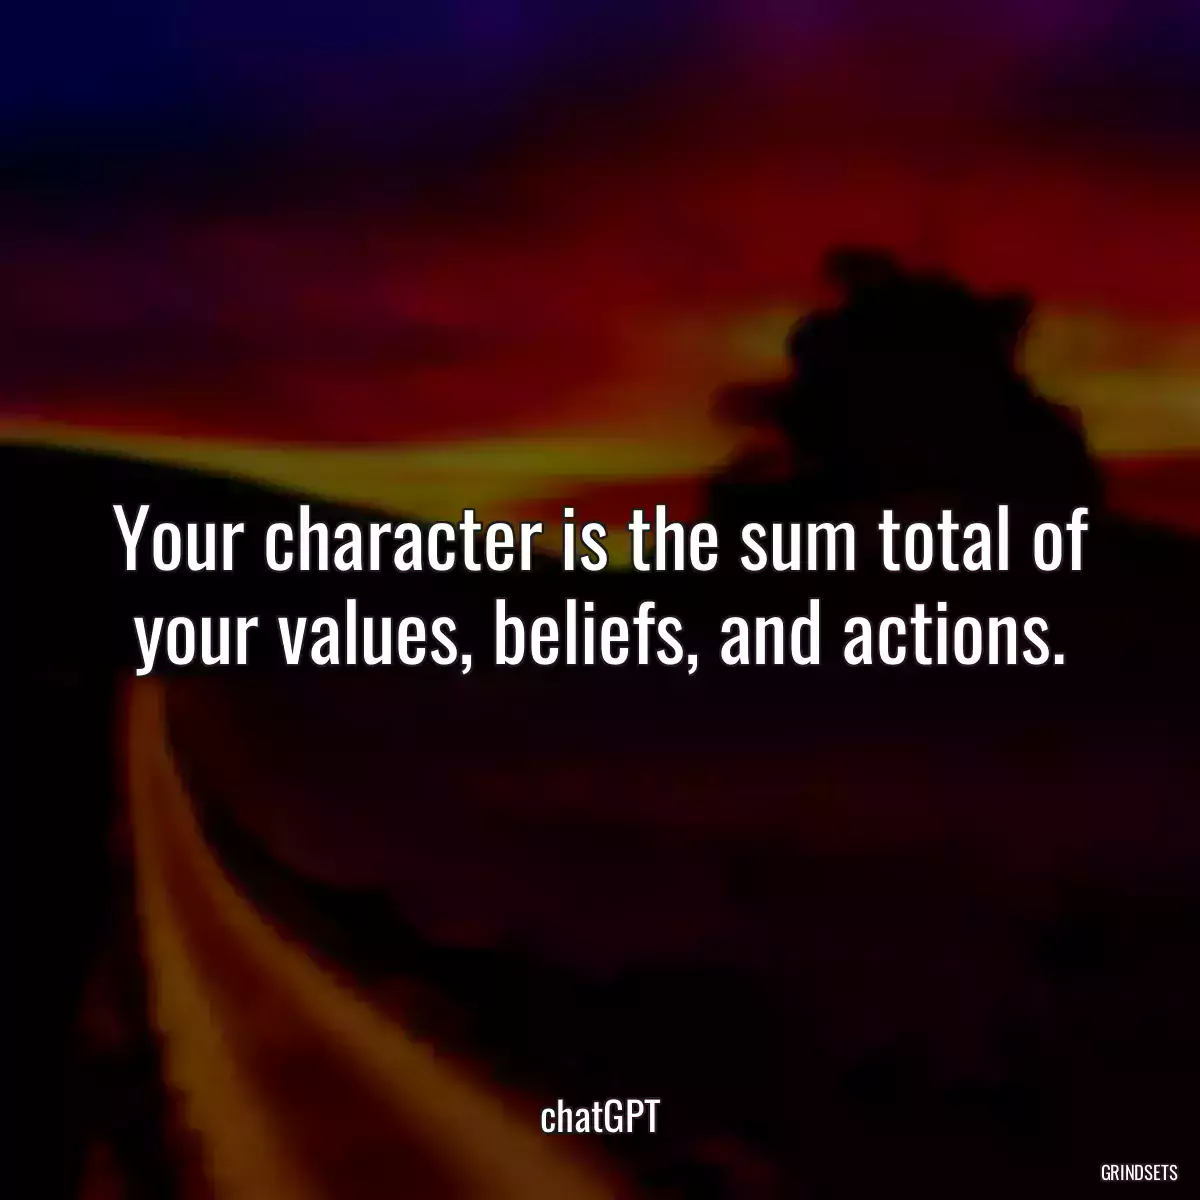 Your character is the sum total of your values, beliefs, and actions.